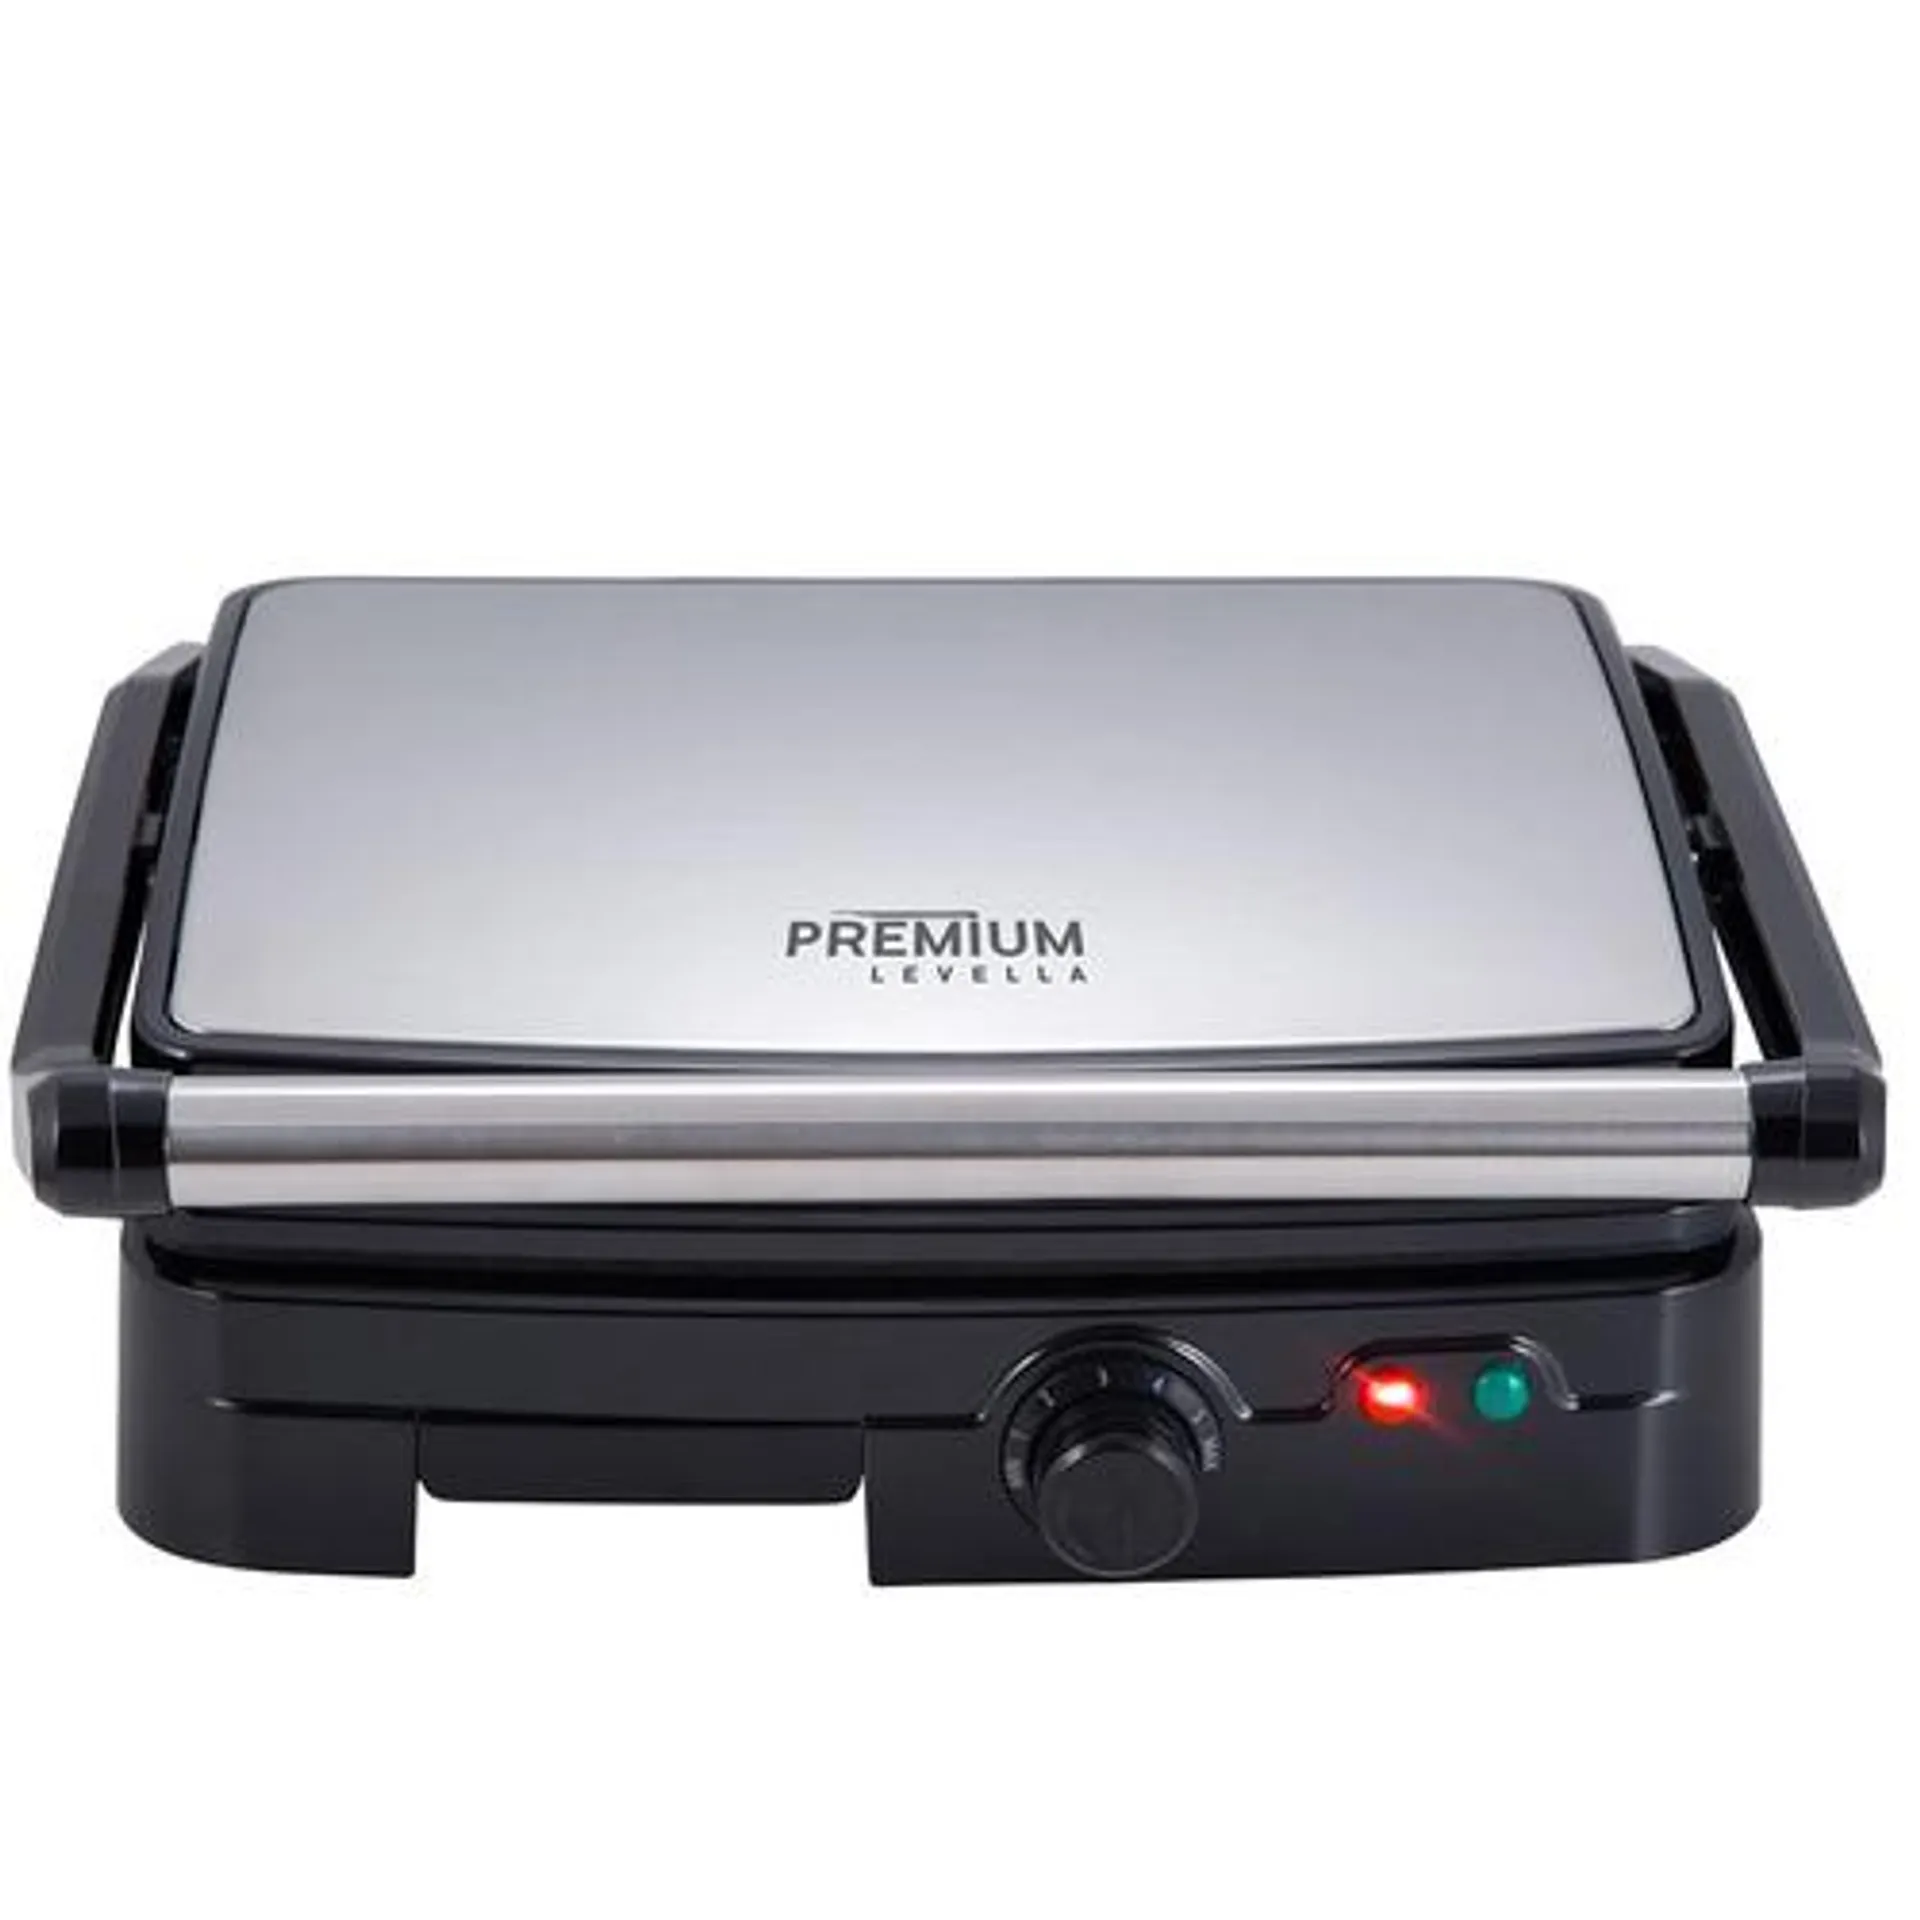 1400 Watt 4-Slice Panini Maker With Non-Stick Grill Plates - Brushed Stainless Steel